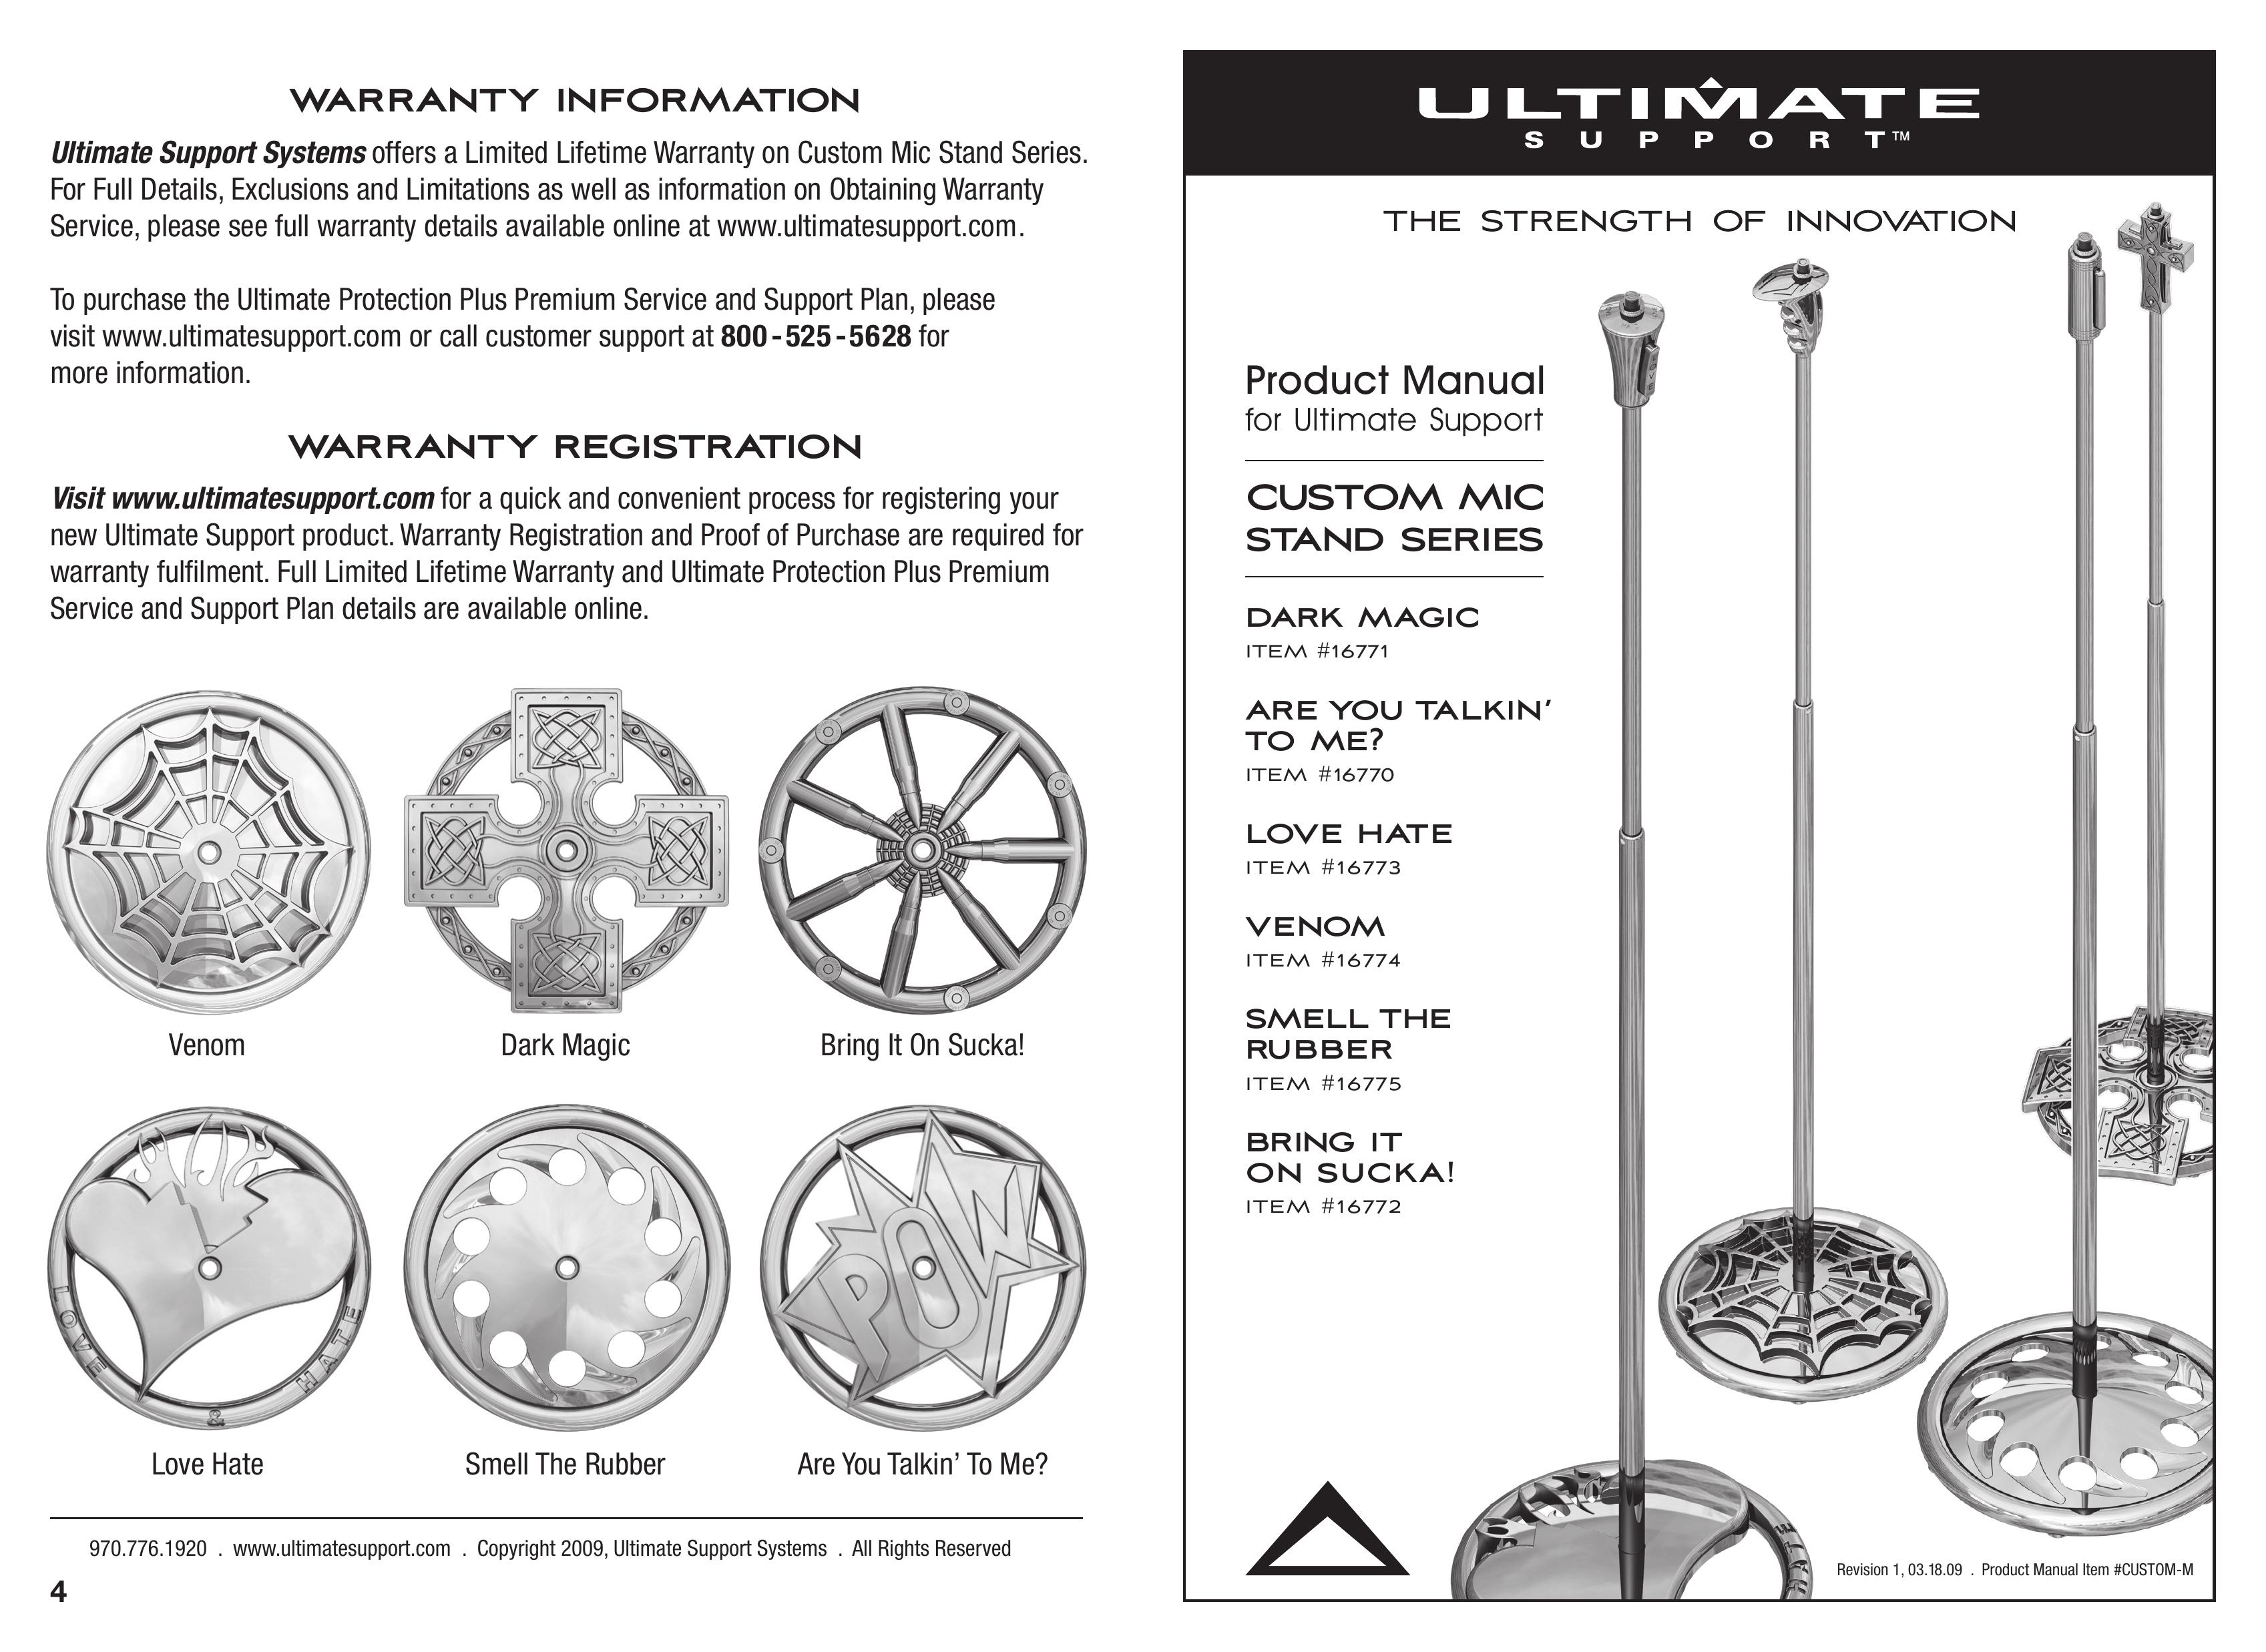 Ultimate Support Systems 16770 Microphone User Manual